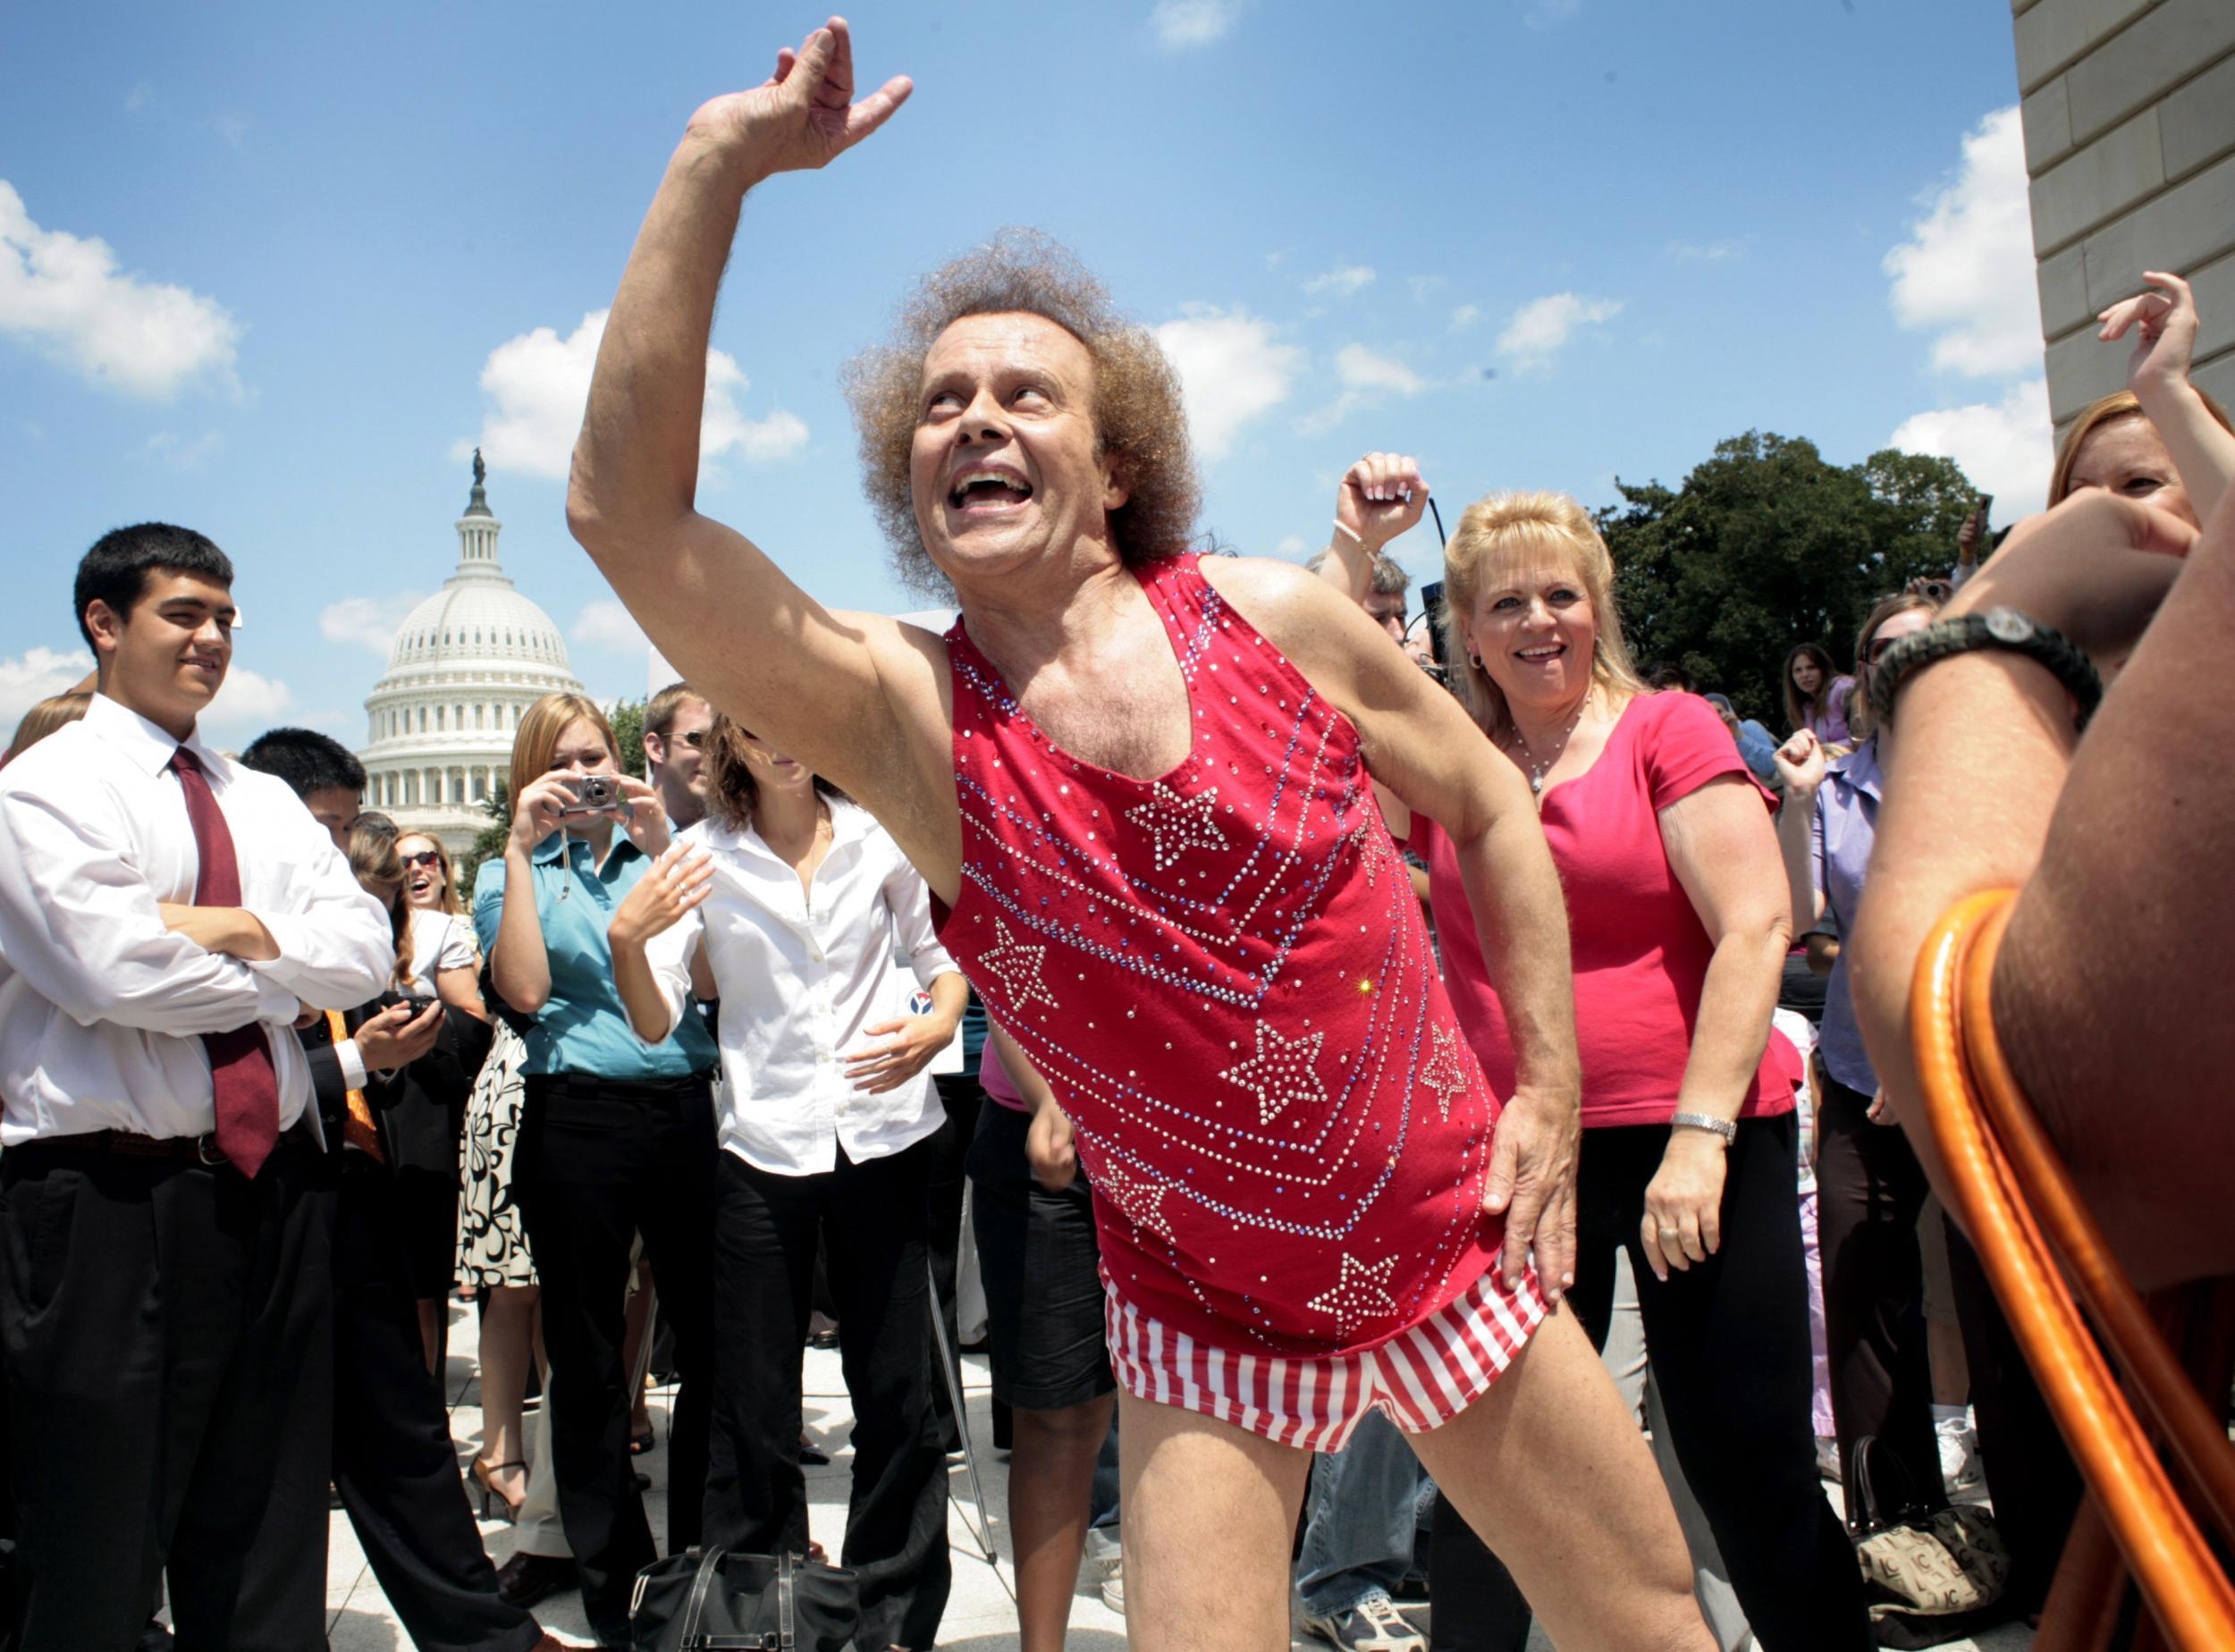 Richard Simmons on Capitol Hill in 2008. He became an anti-obesity crusader with a focus on boosting self-esteem